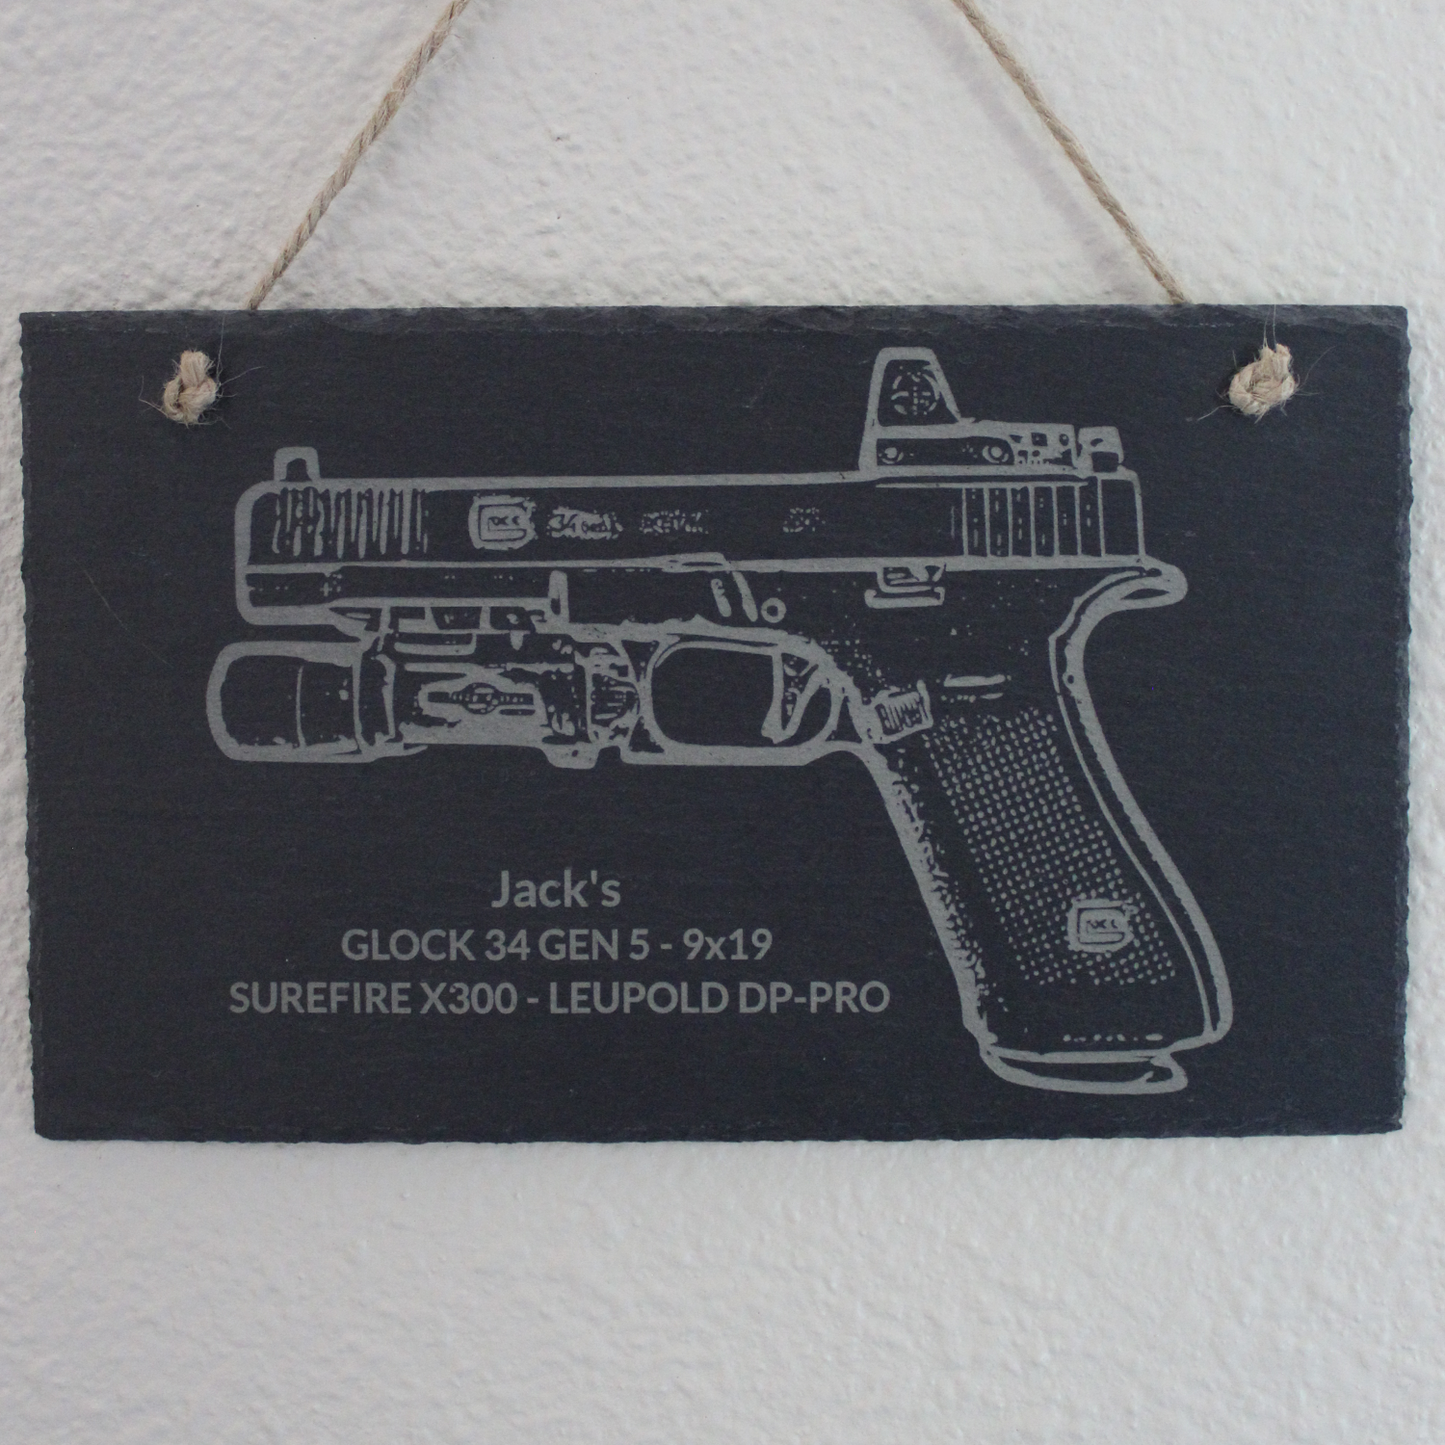 Hand Sketched And Personalized Image of Your Firearm On Hanging Slate Plaque - Upload a Photo of Your Firearm To Be Engraved - Perfect for Gun Lovers, Birthdays, Fathers Day Or Special Occasions